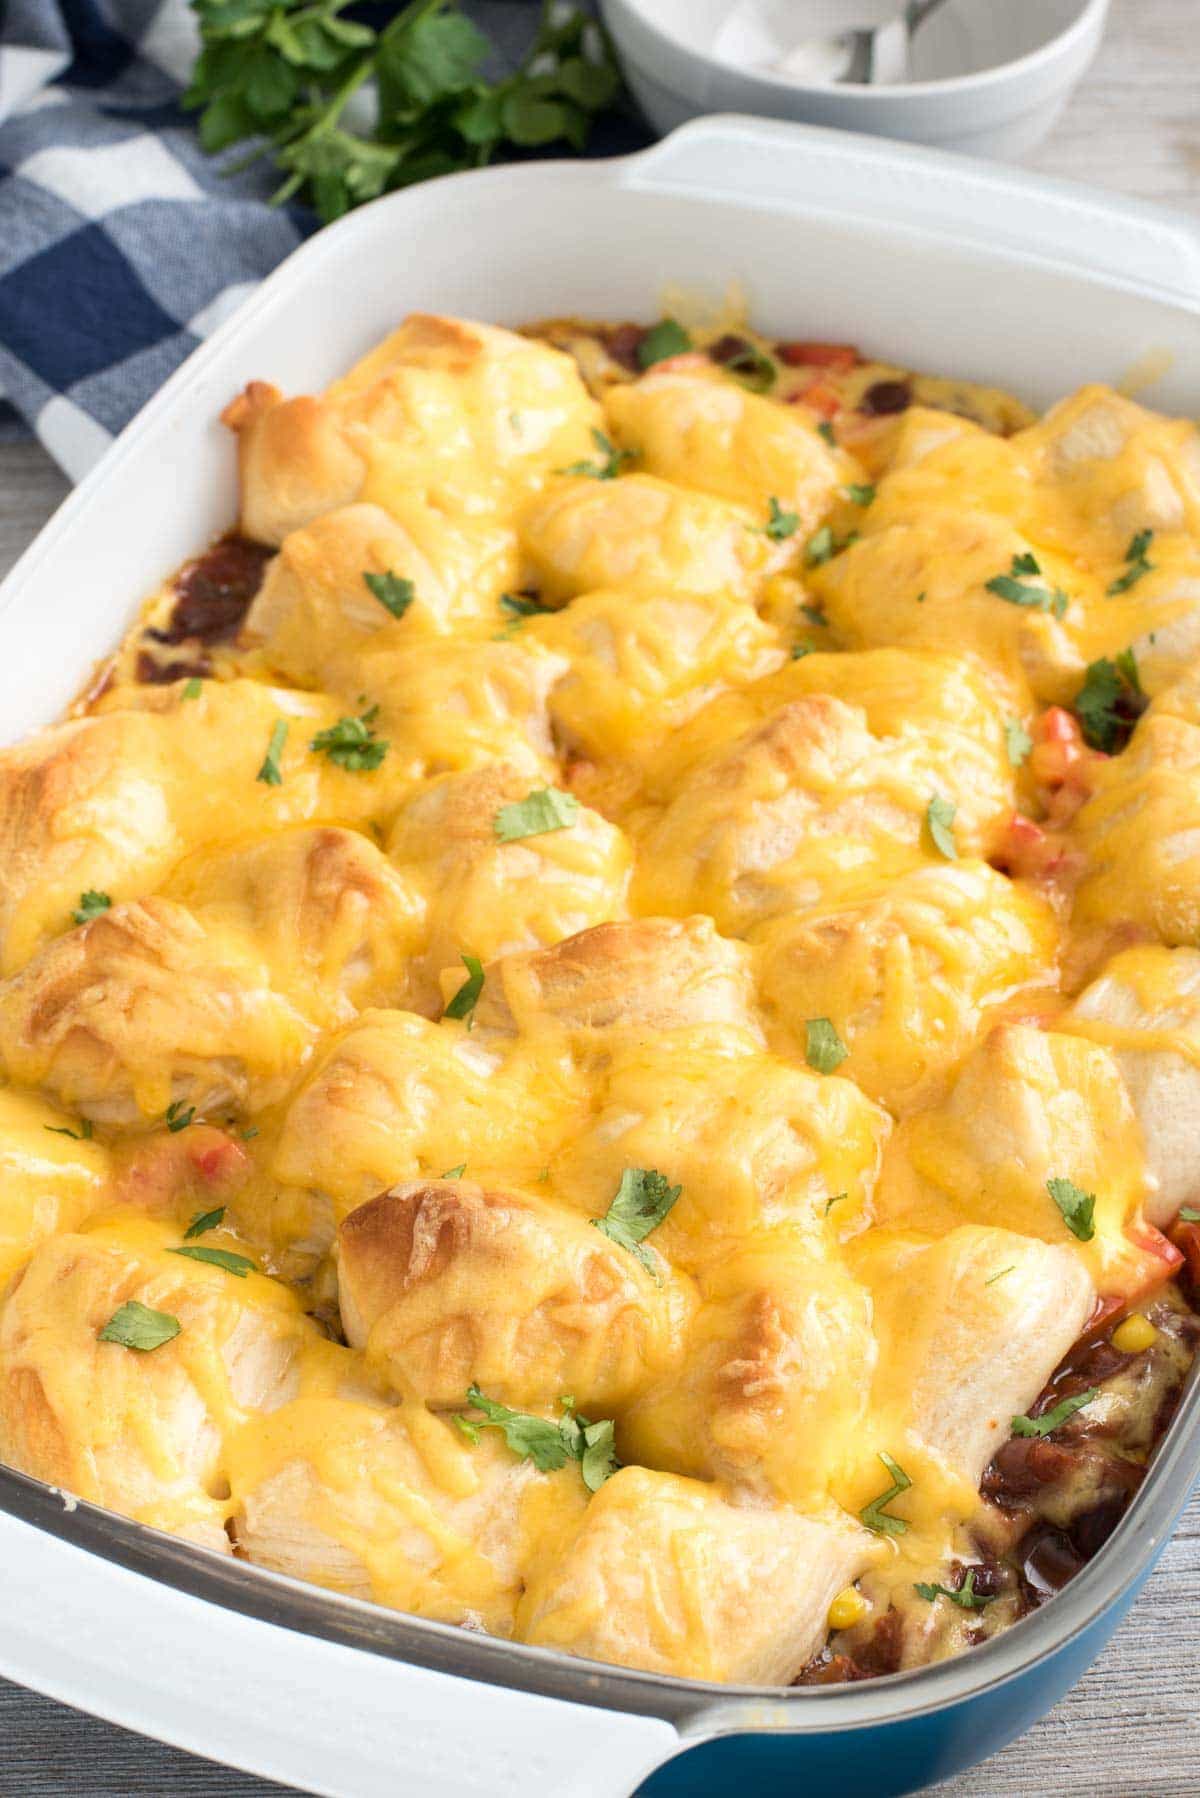 Chili Biscuit Bake